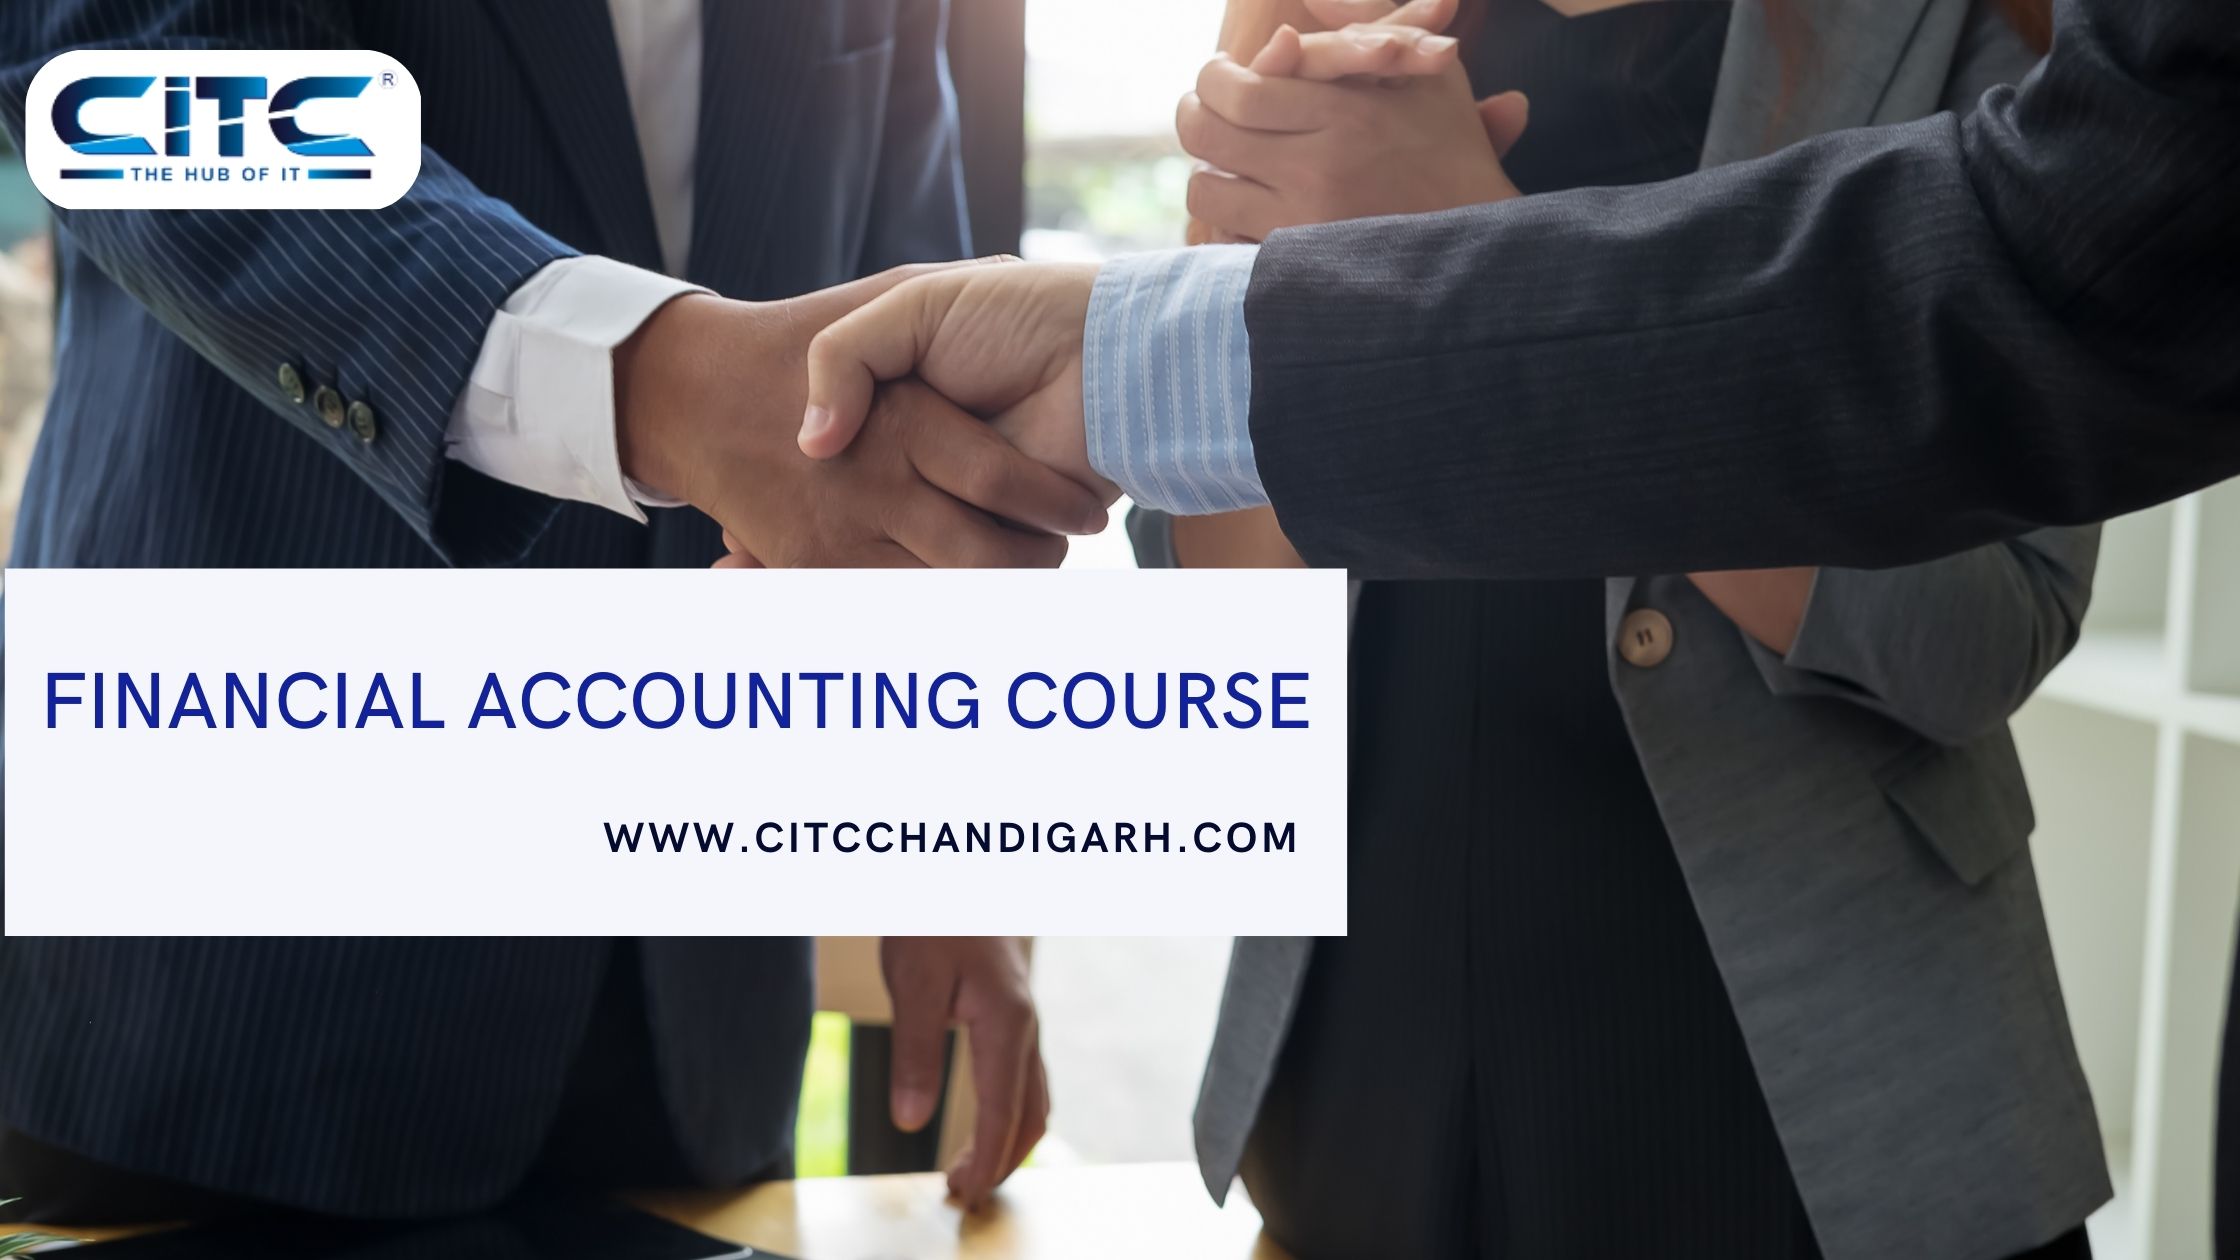 Certification Course in Financial Accounting with CITC